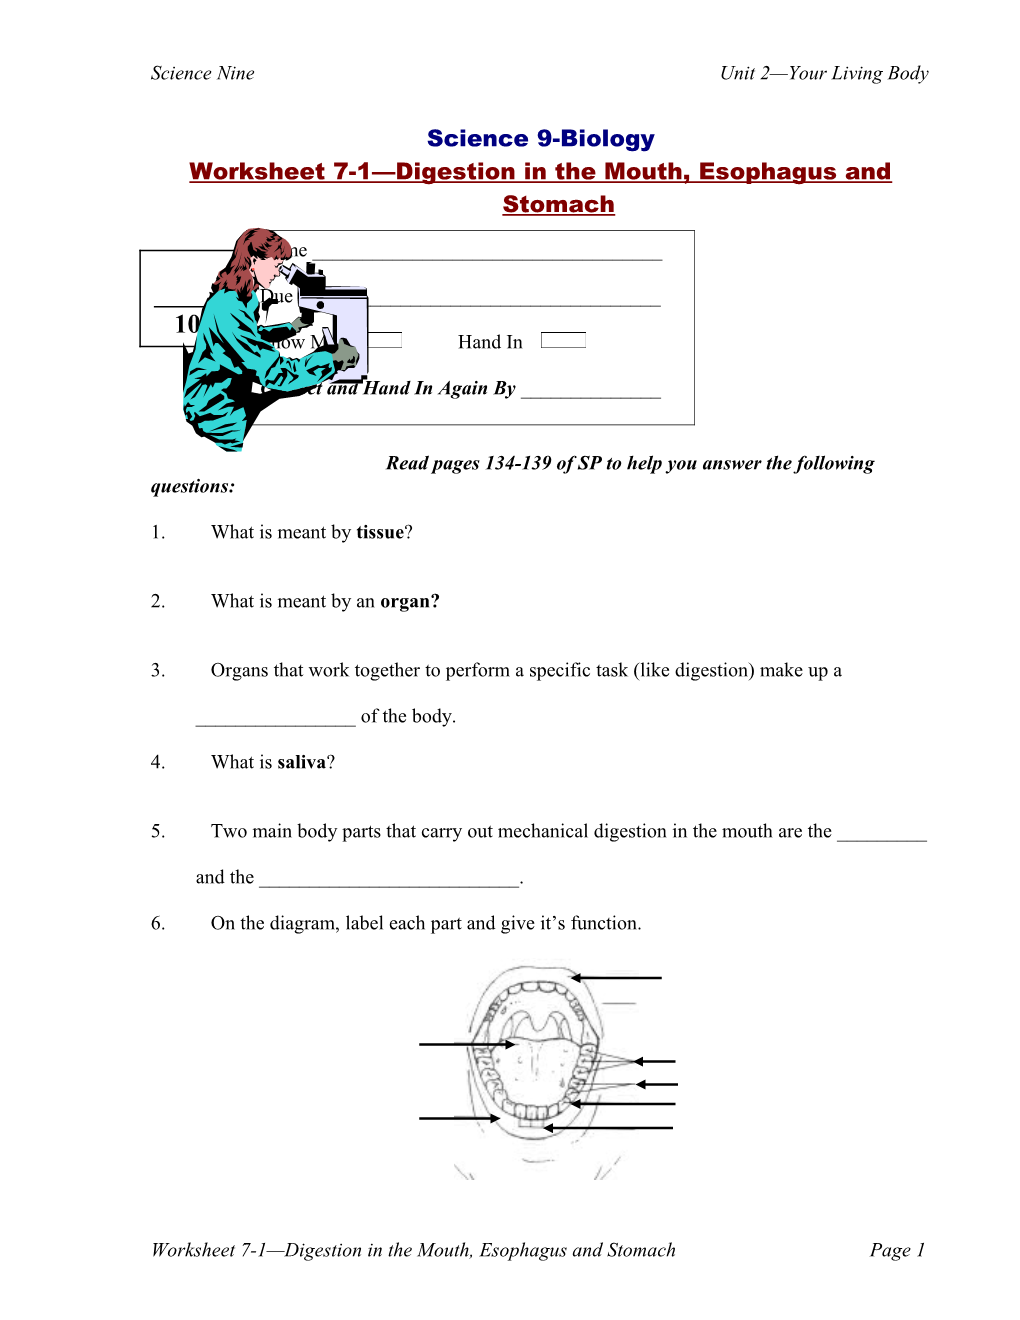 Worksheet 7-1 Digestion in the Mouth, Esophagus and Stomach